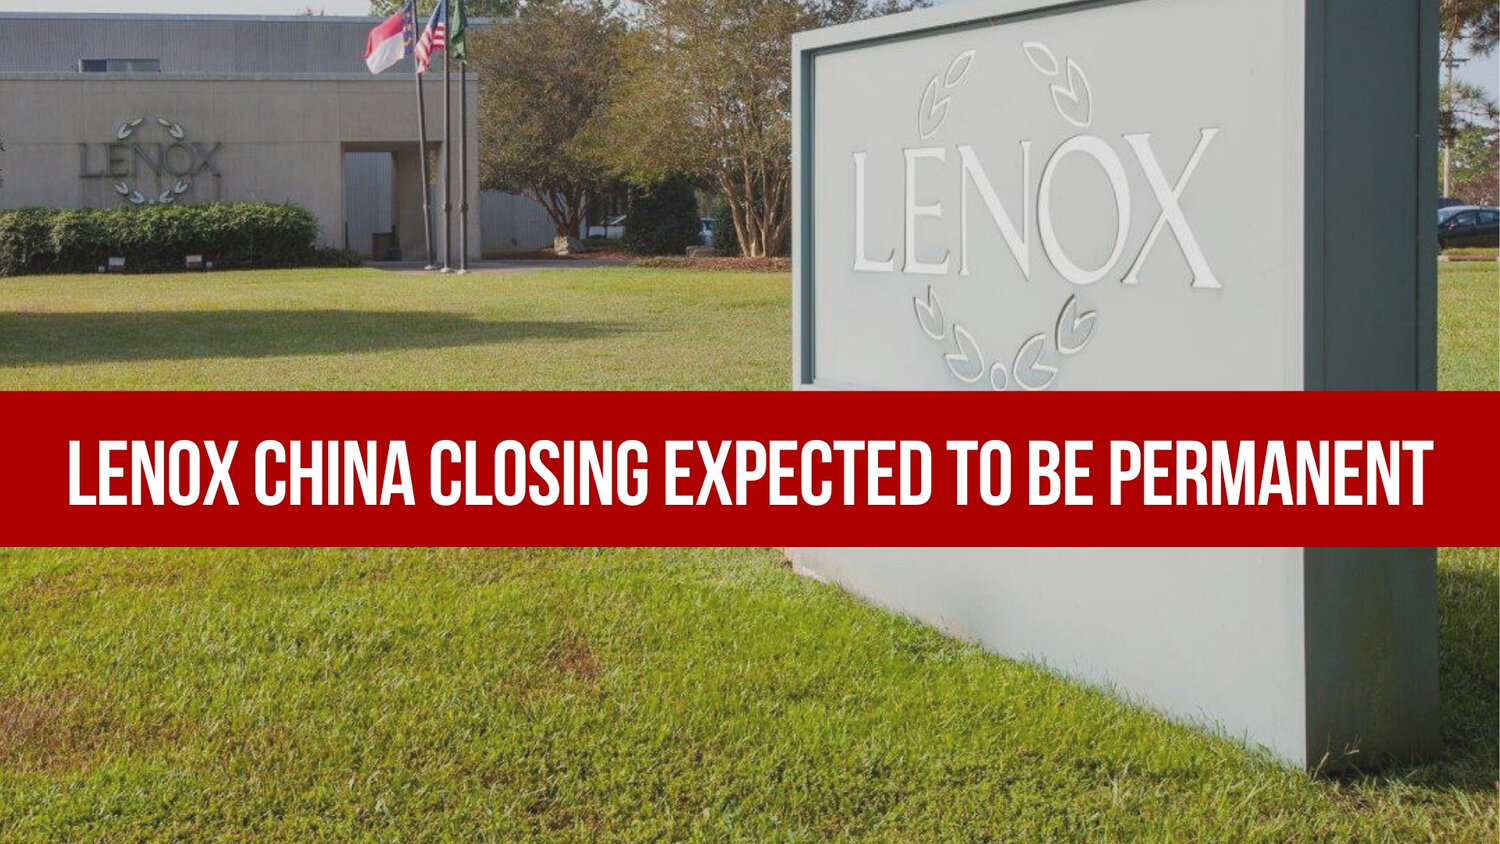 Lenox China closing expected to be permanent